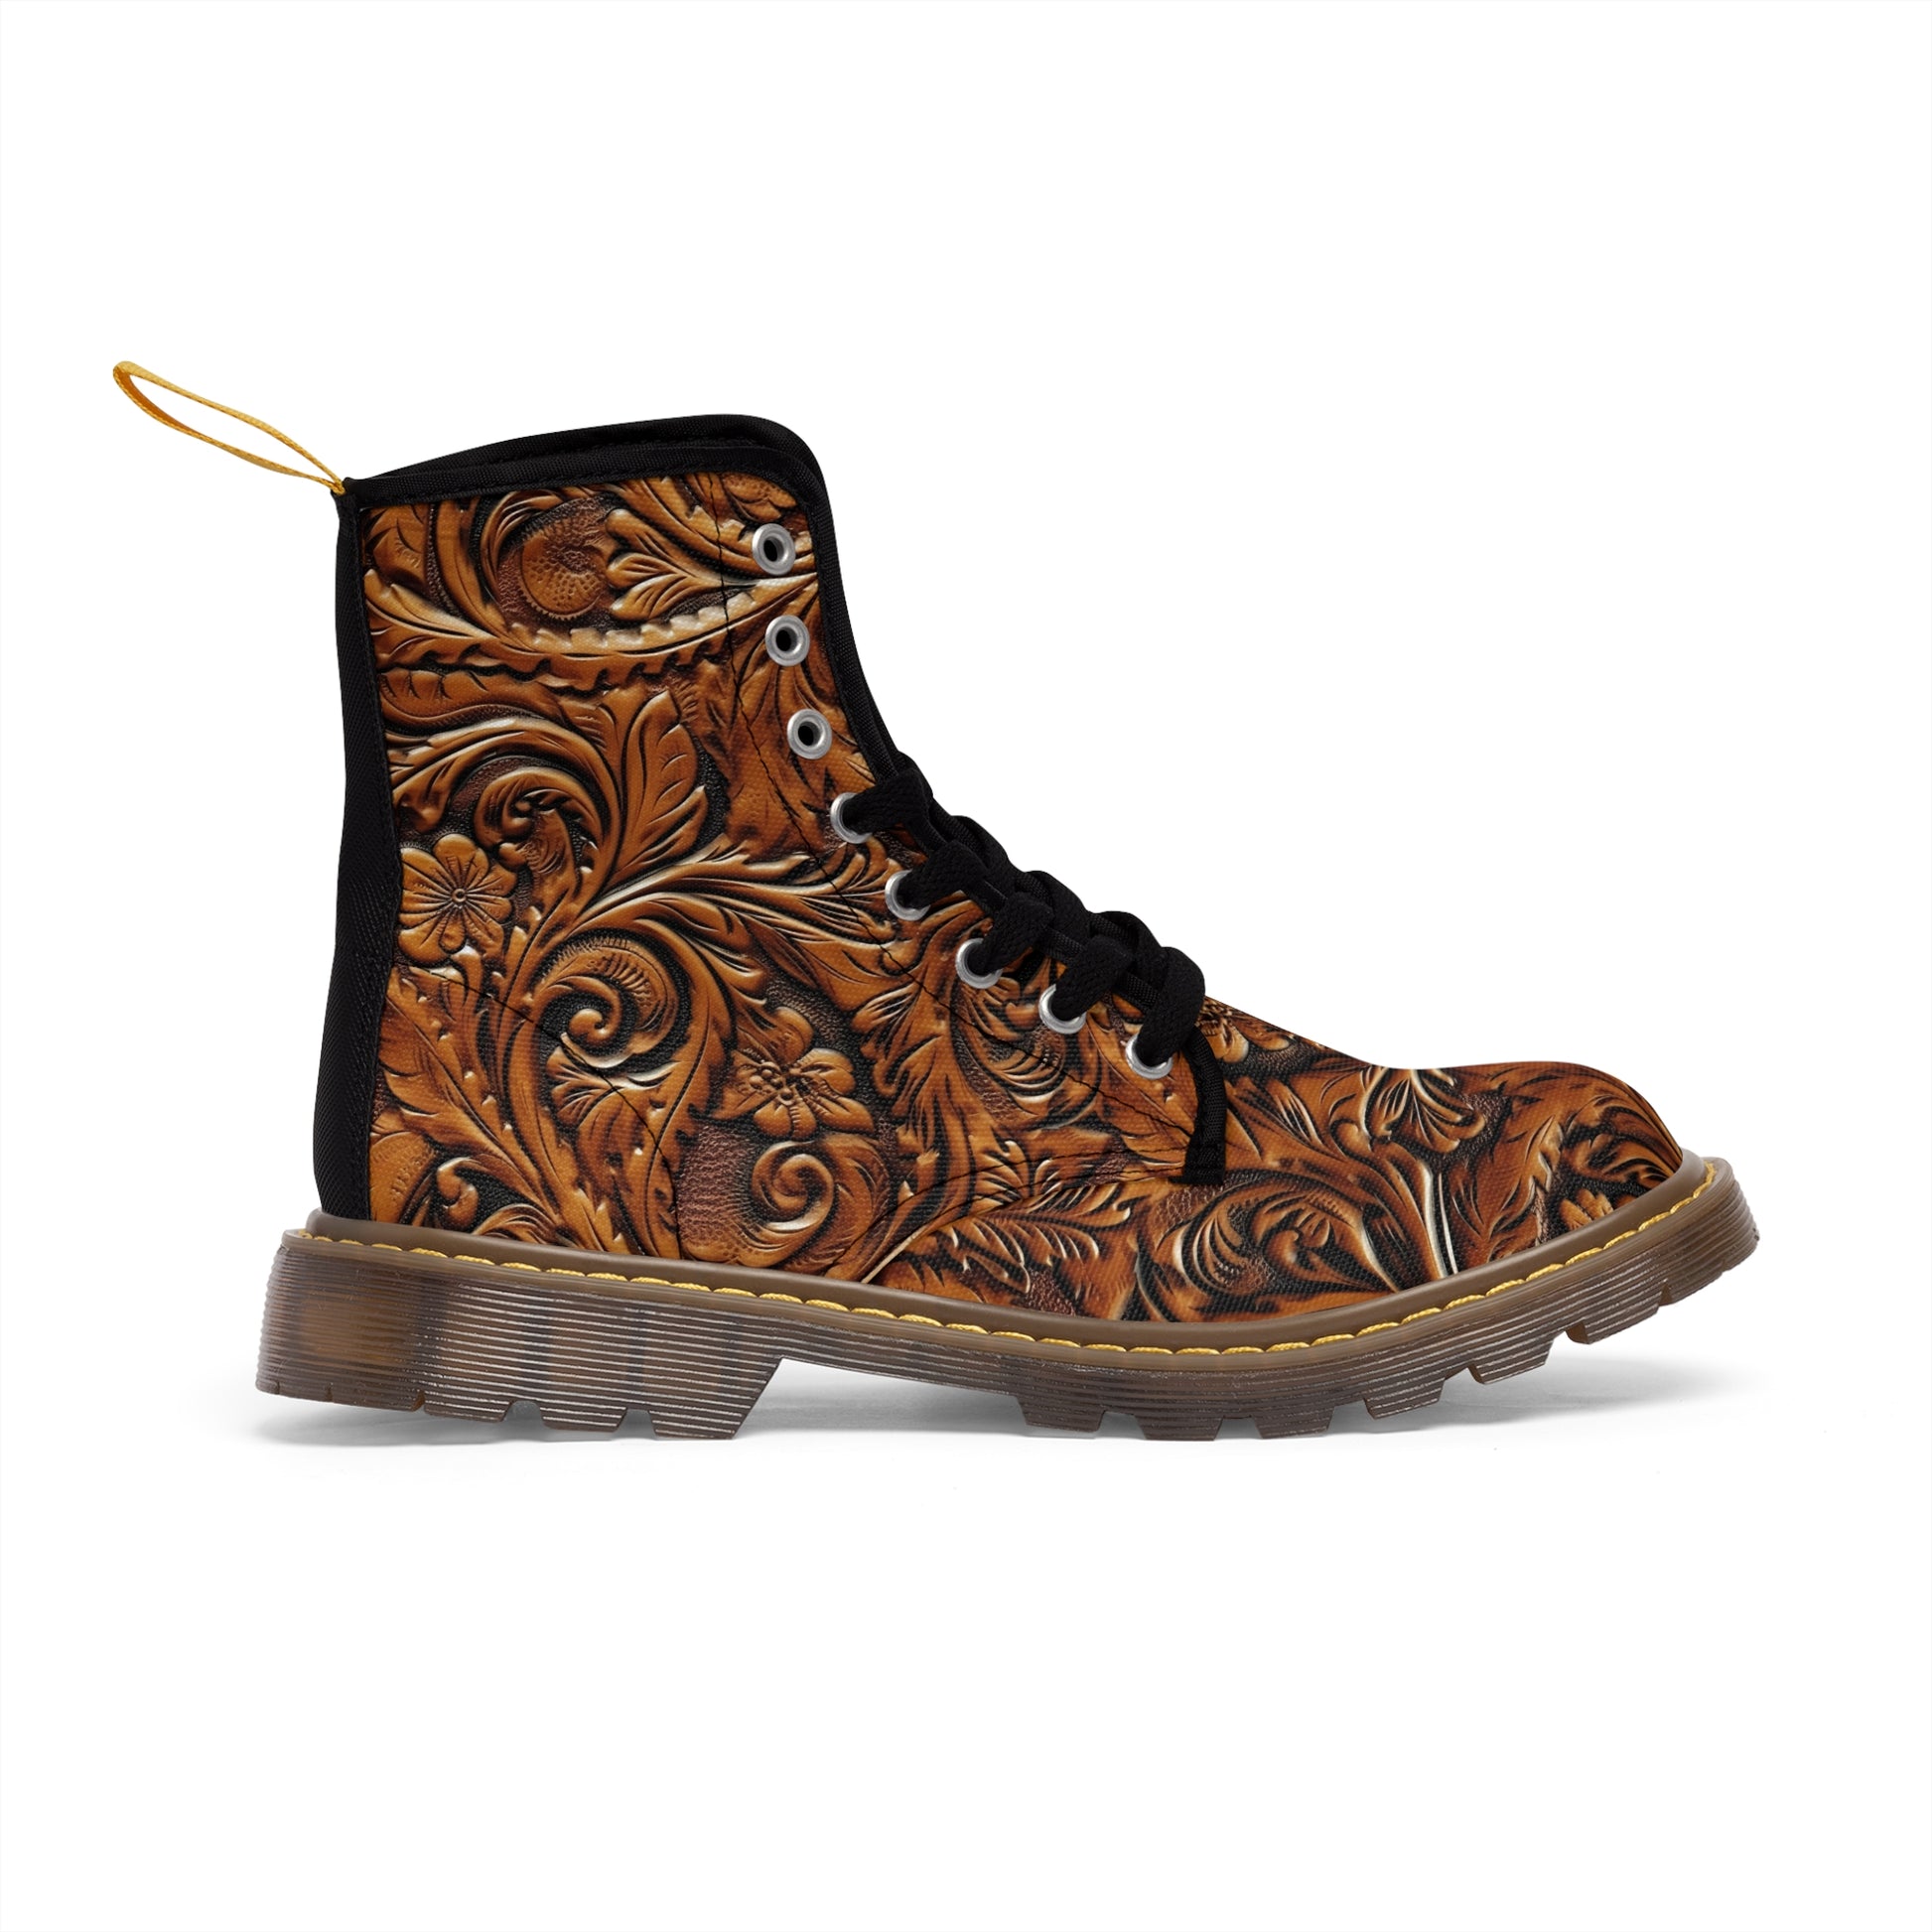 Tooled Leather Men's Canvas Boots (Brown) by Studio Ten Design